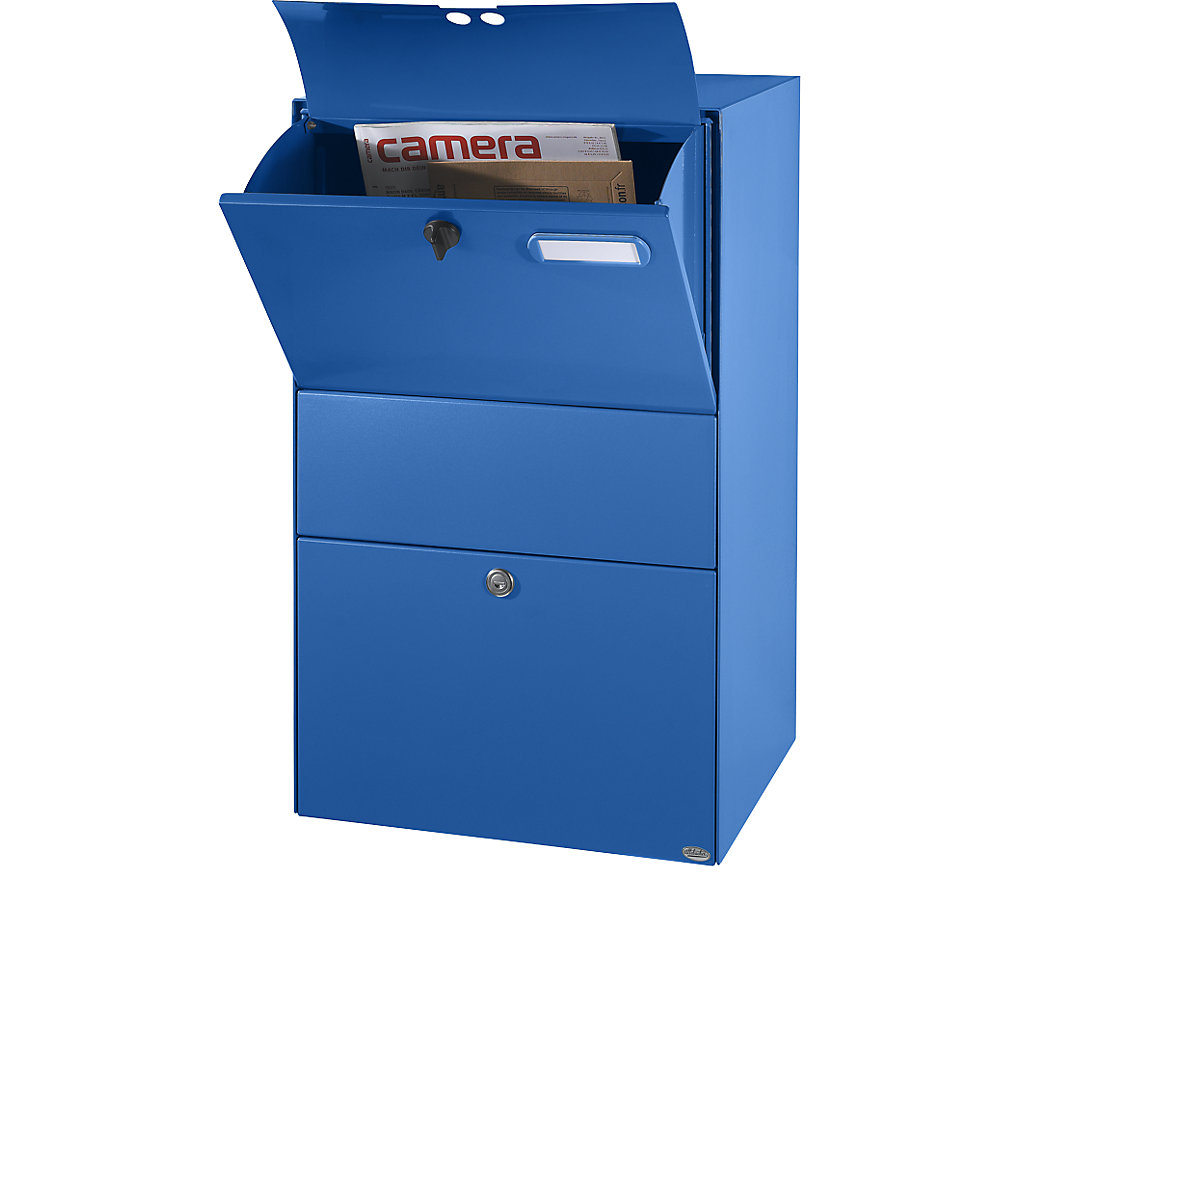 Boîte aux lettres XXL, l x h x p 390 x 650 x 315 mm, bleu sécurité RAL 5005-6